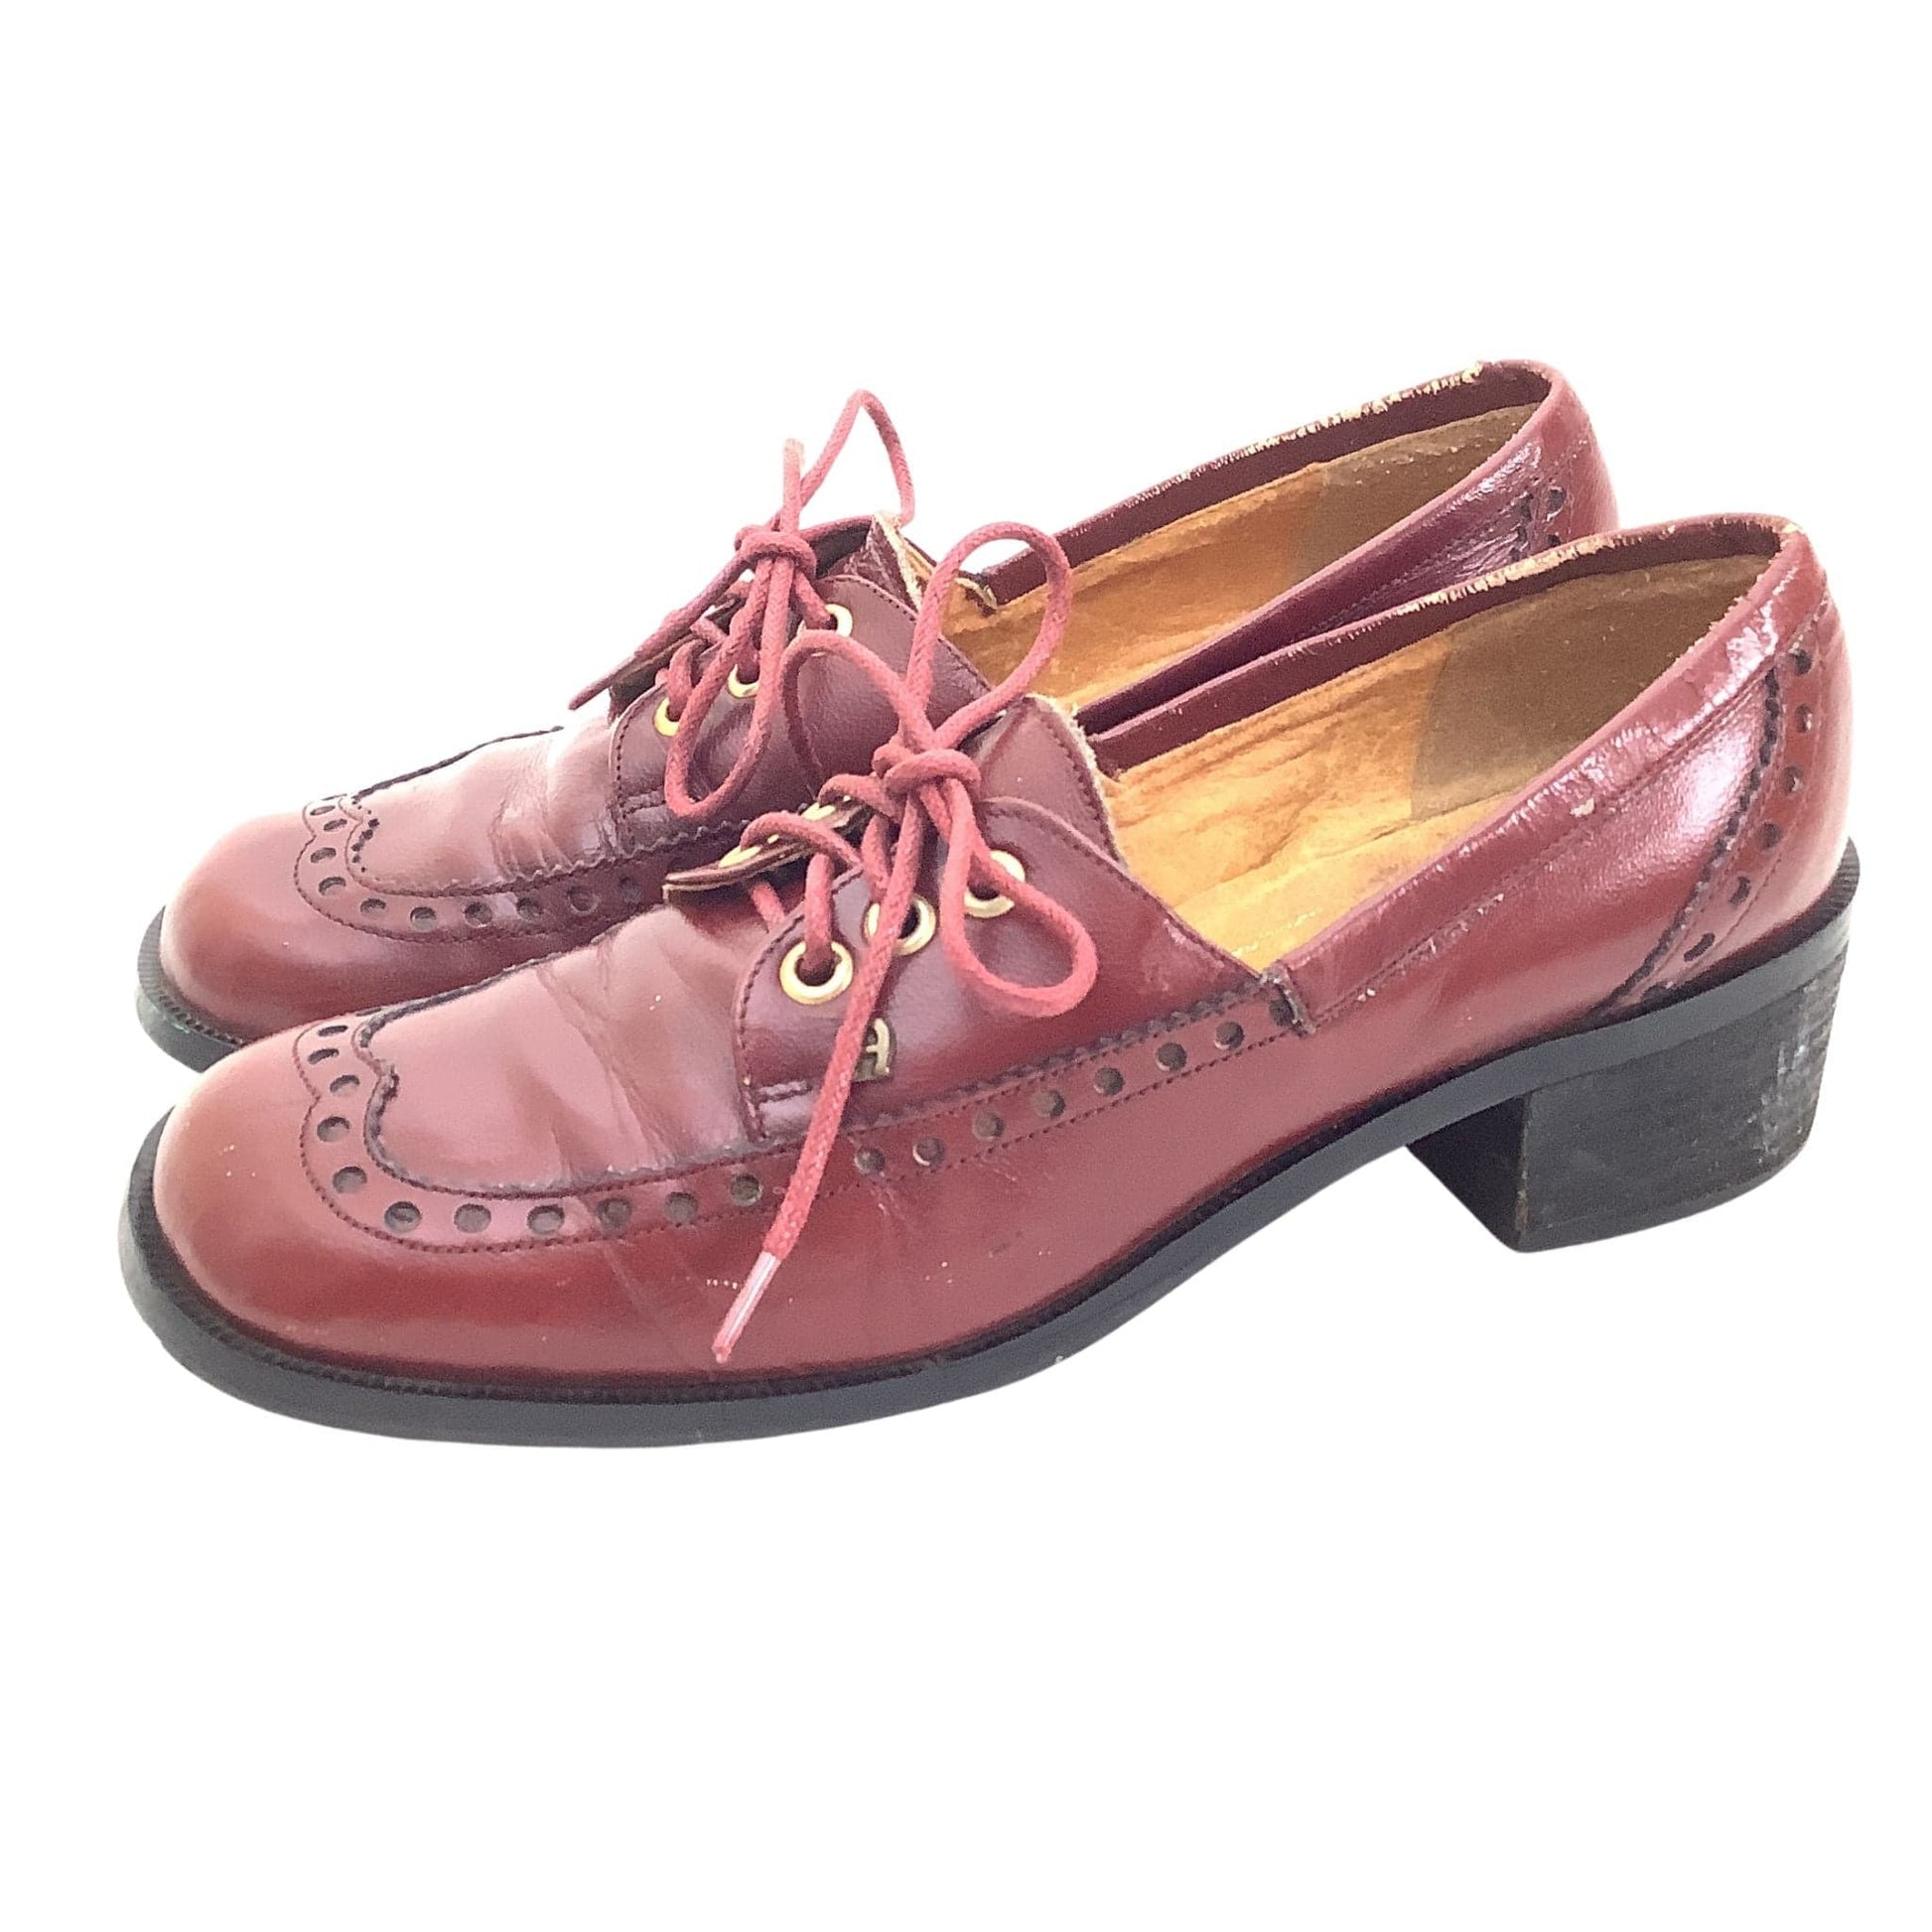 Aigner Lace up Brogues 8 / Oxblood / Mod